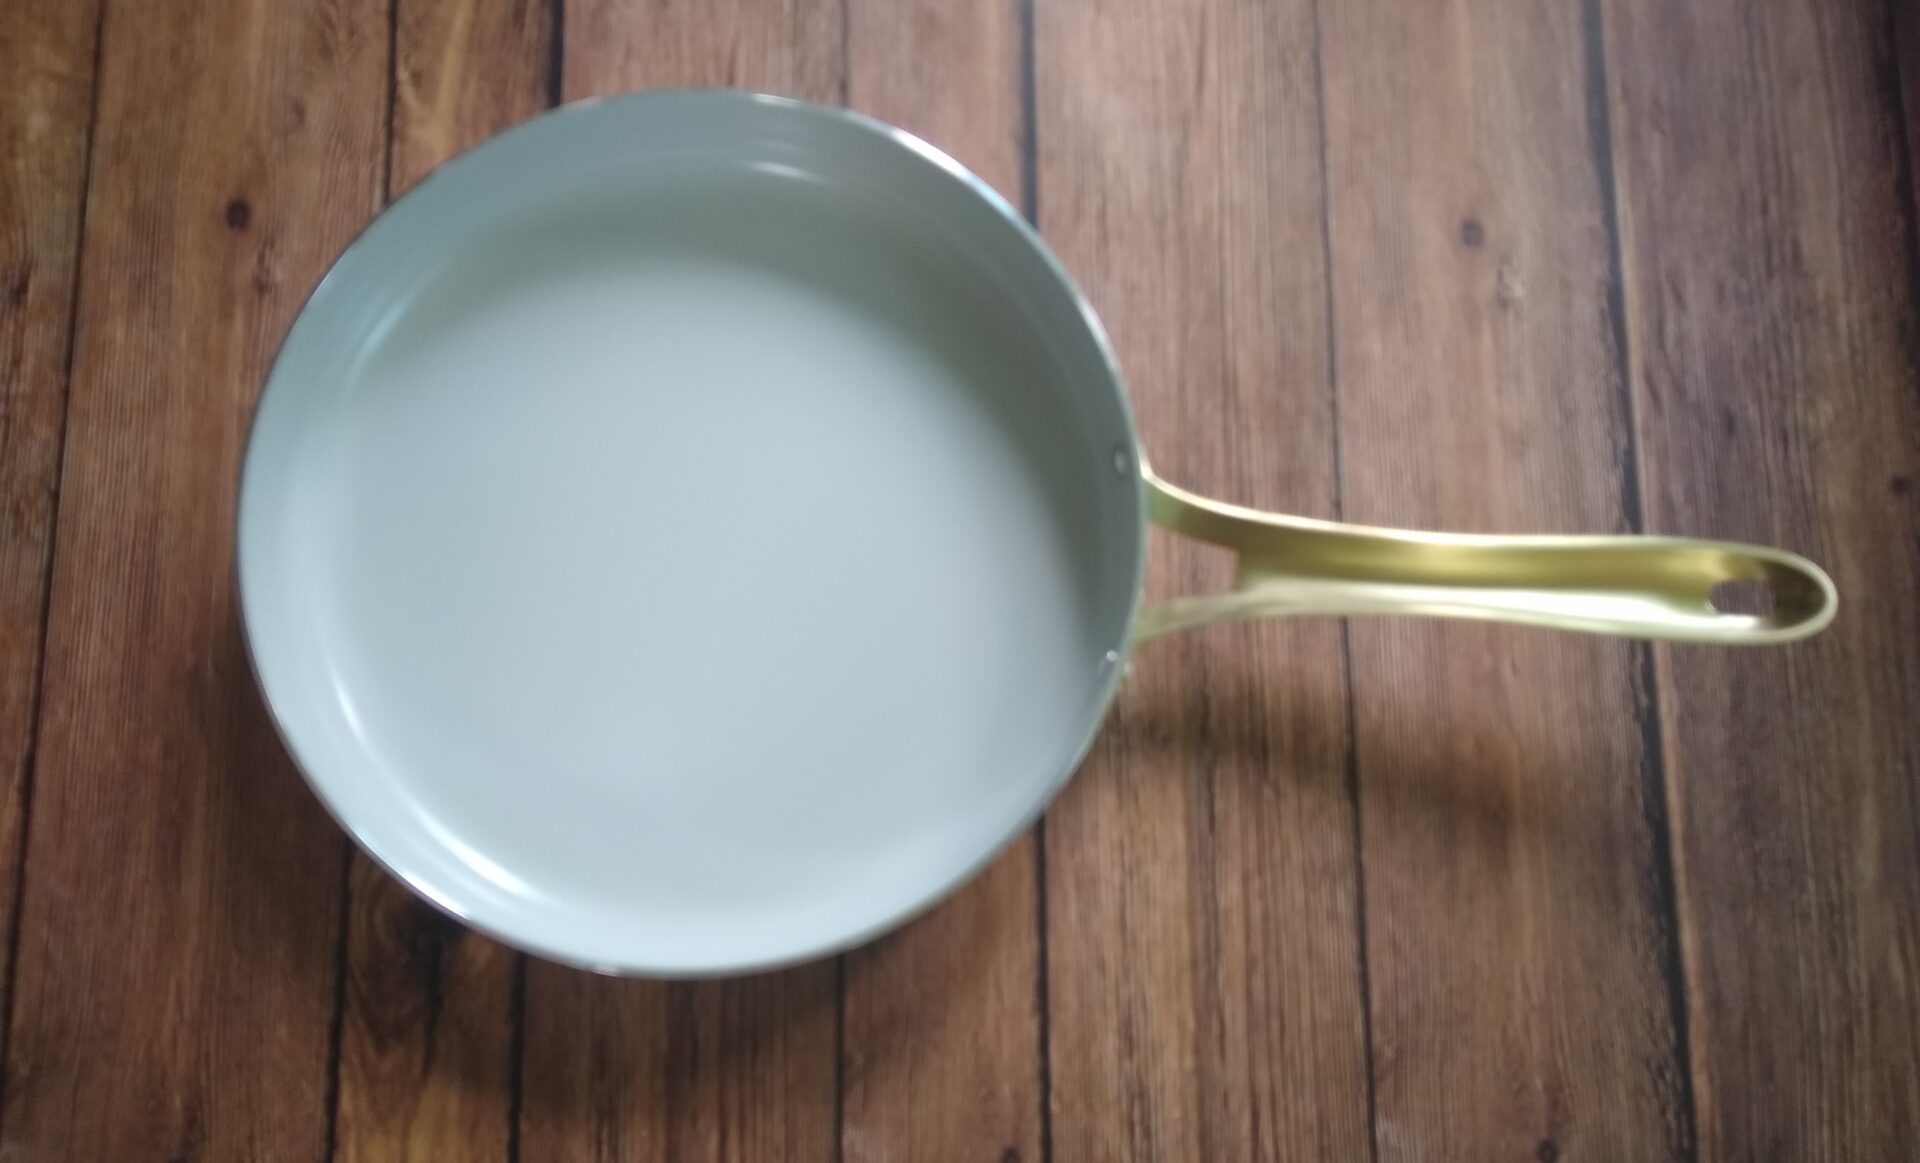 Aldi Crofton 11 inch Frying Pan CREAM Caraway Dupe Sold Out